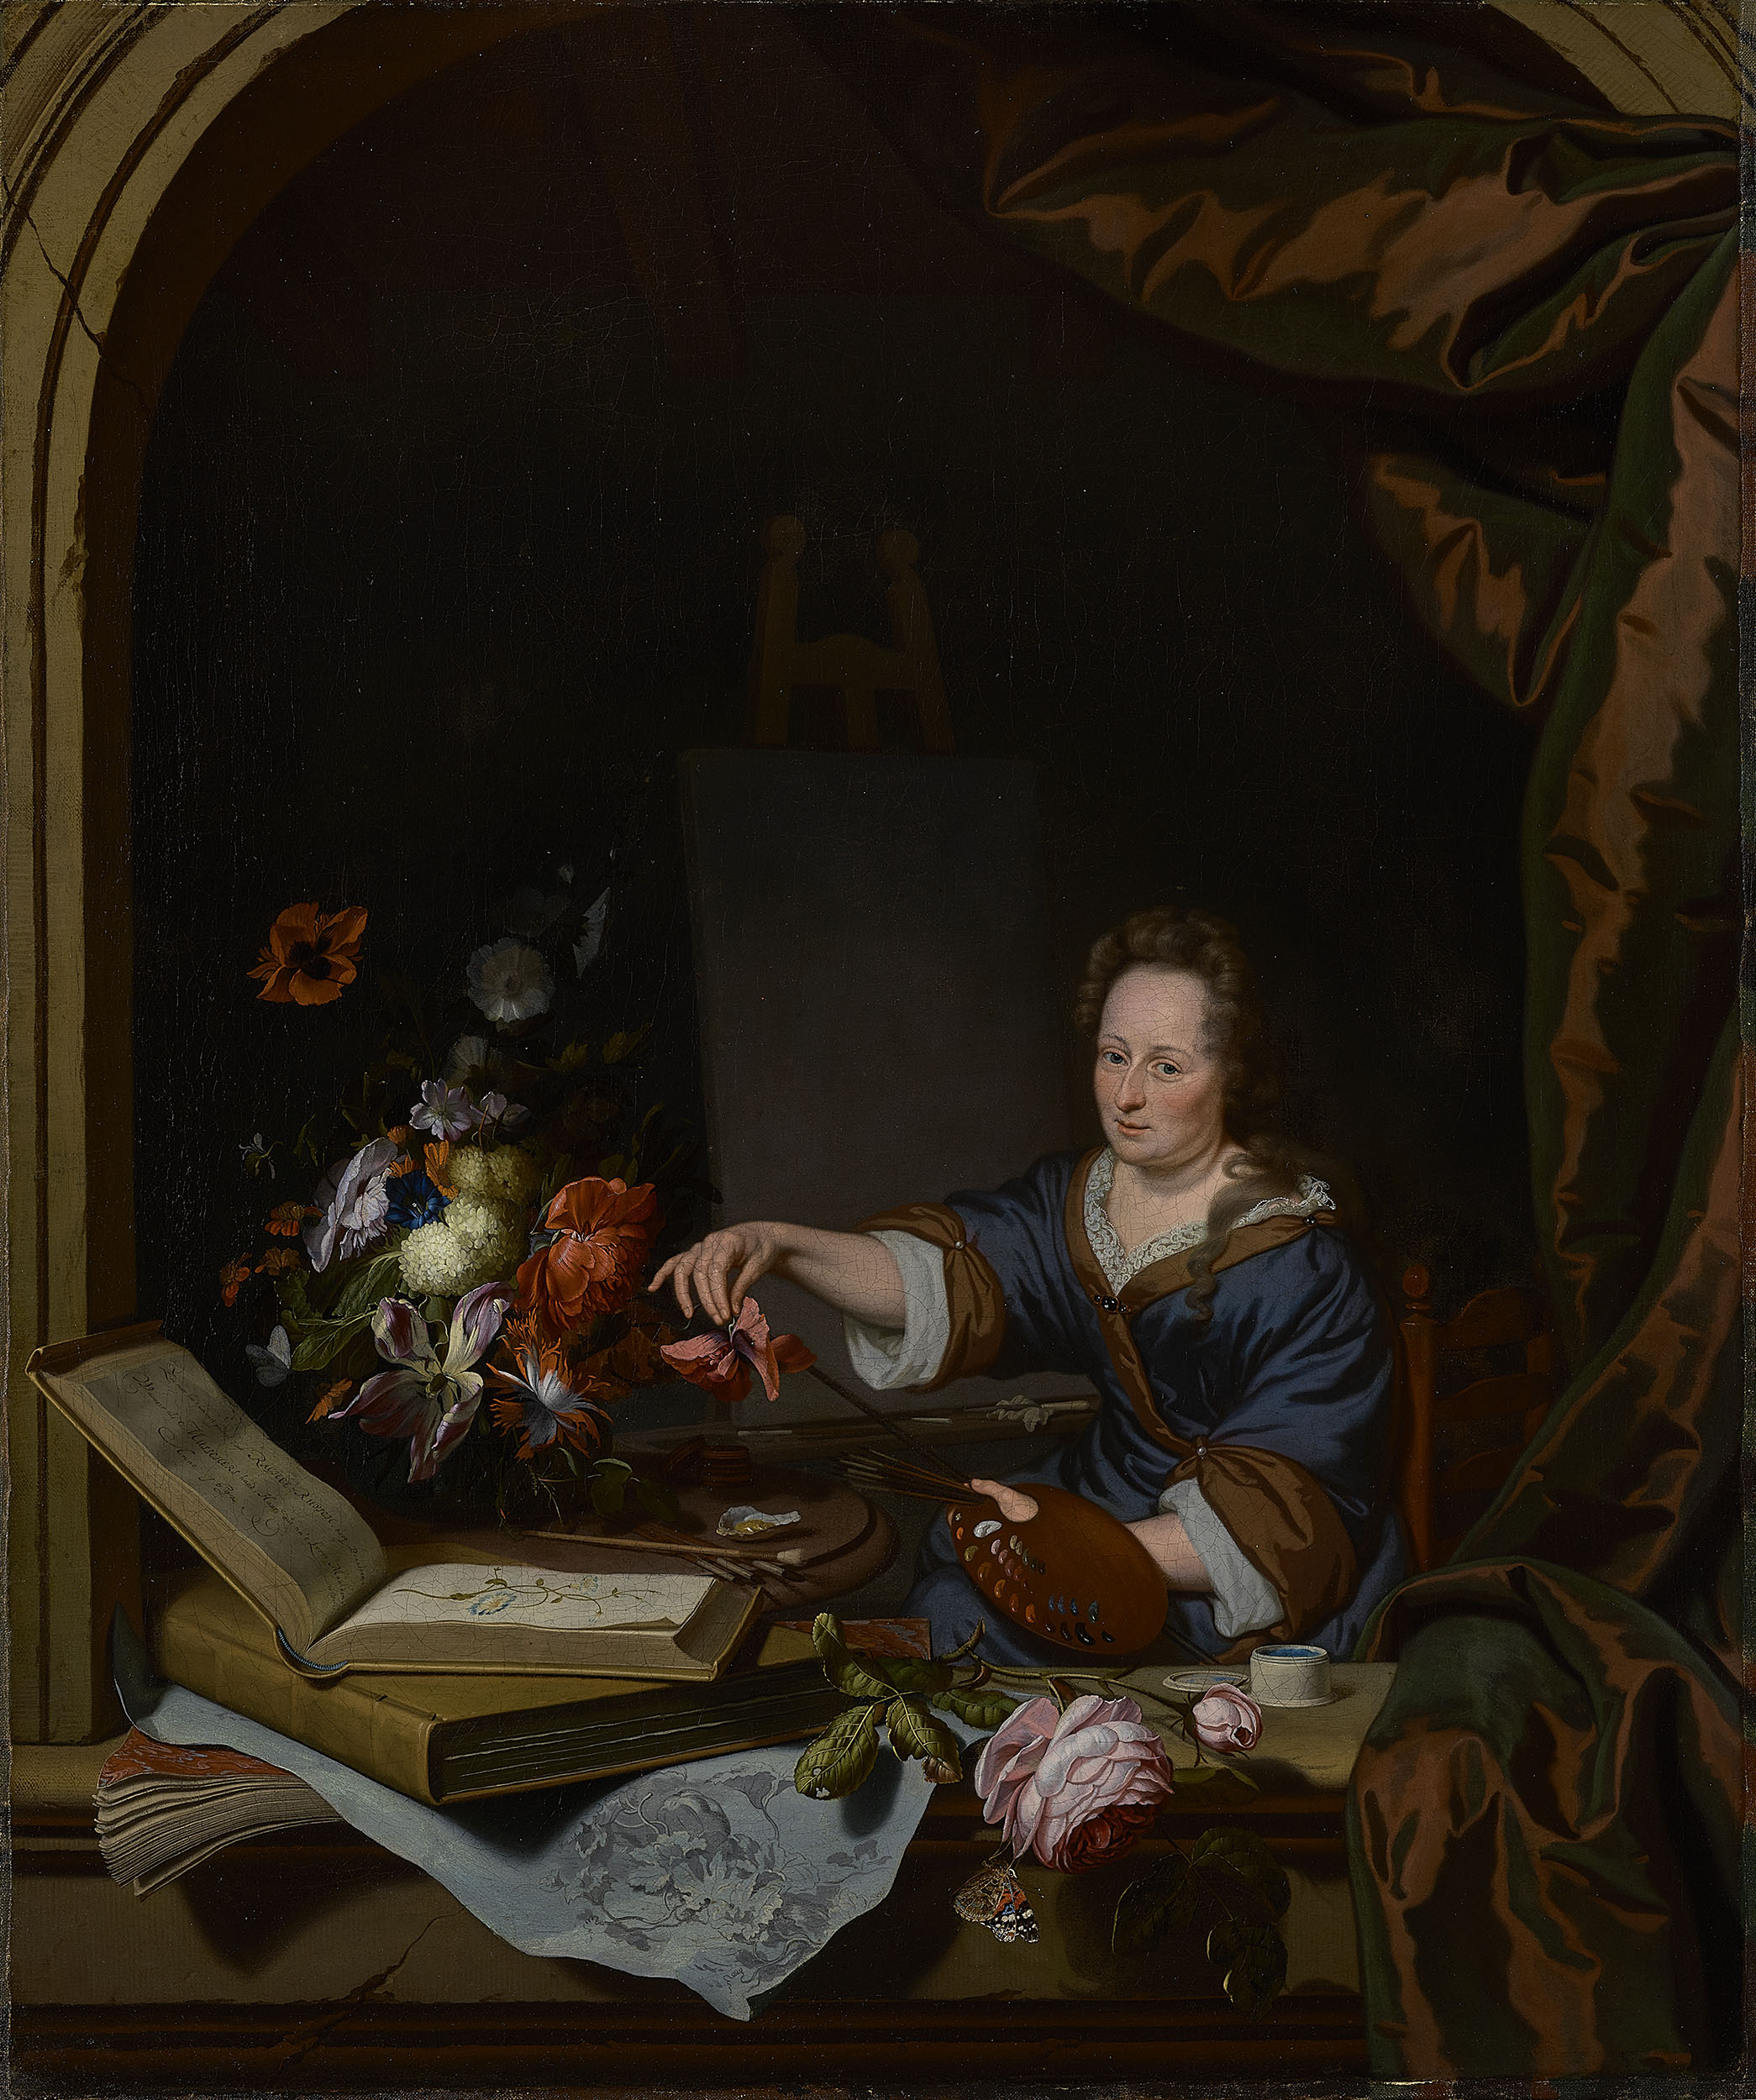 A portrait of the artist sitting at an easel, with flowers, books, and papers in front of her. She holds a palette and brushes in one hand and a flower in the other. She looks out directly at the viewer with a confident, neutral expression. She wears a blue dress trimmed with brown fabric and white lace. The brown color is echoed in a large, satin curtain swag on the right side of the composition. The image is set in a painted, architectural frame, as though we are observing her through an open window.